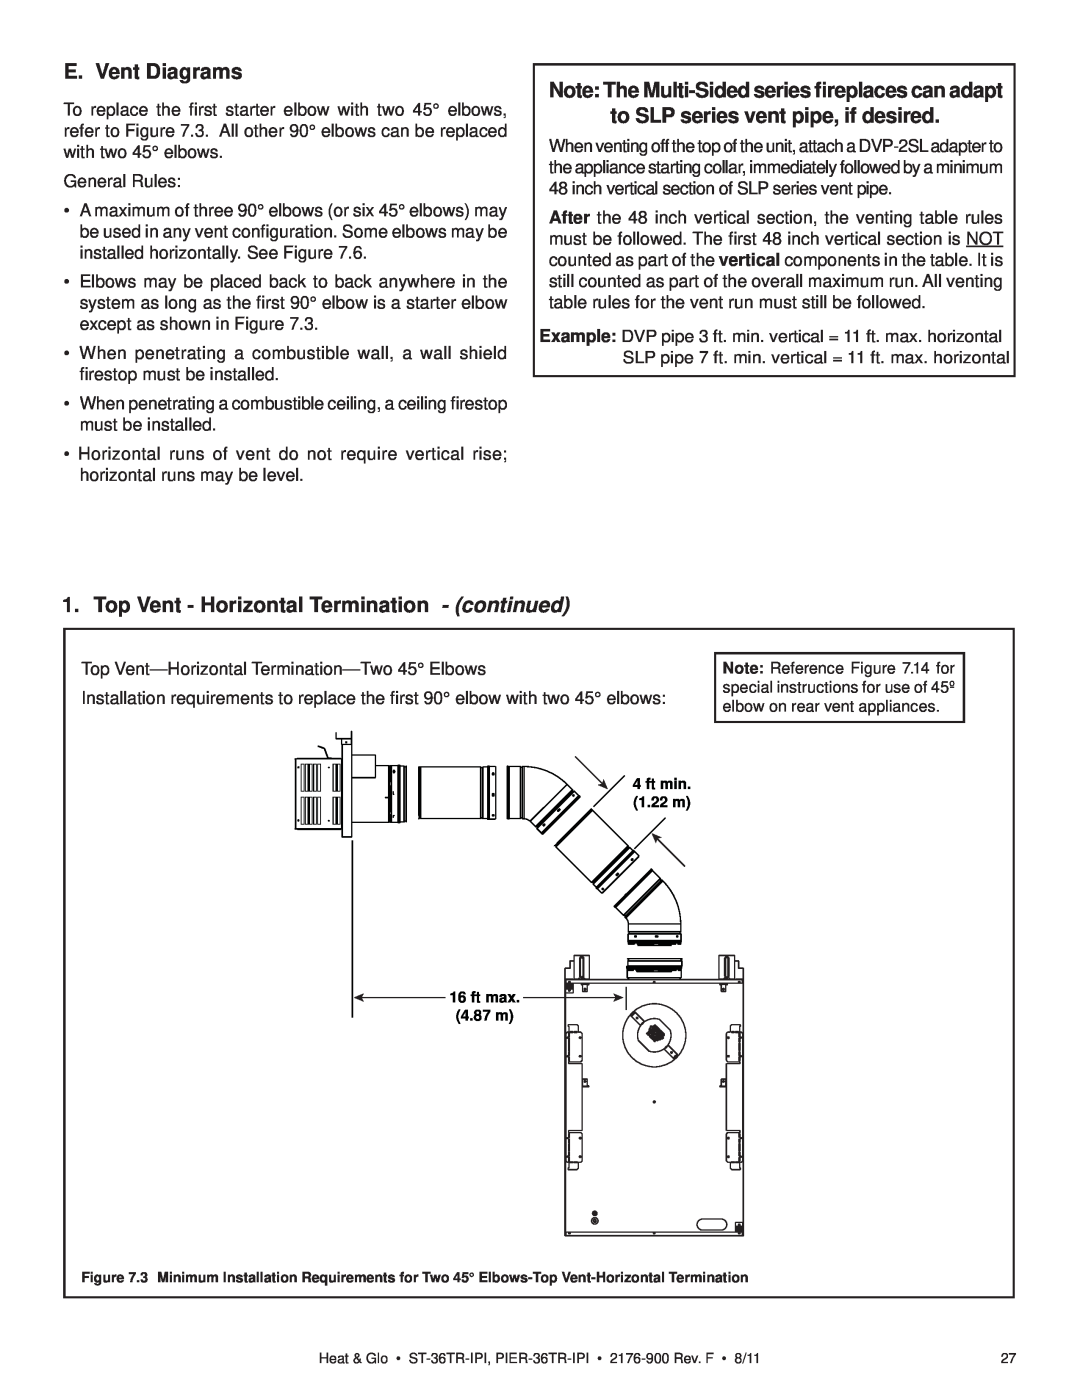 Heat & Glo LifeStyle ST-36TR-IPI, PIER-36TRLP-IPI E. Vent Diagrams, Note The Multi-Sided series ﬁreplaces can adapt 